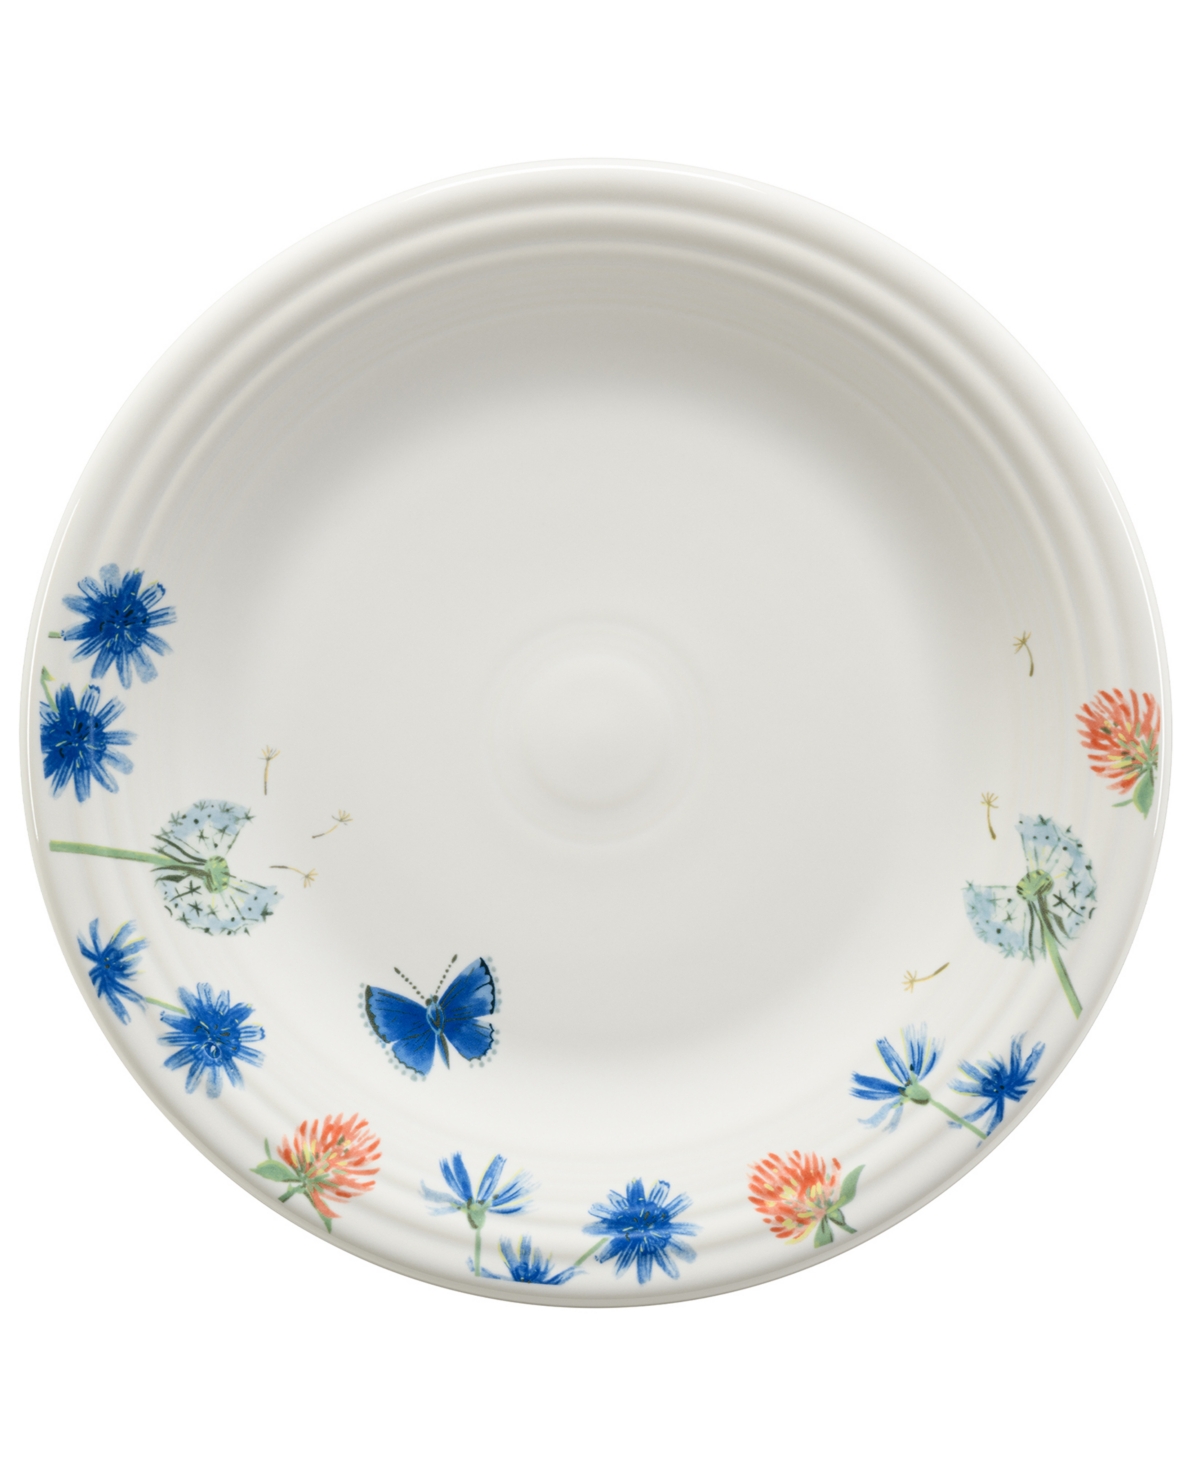 Breezy Floral Dinner Plate - Multi Color Design With Fiesta Colors